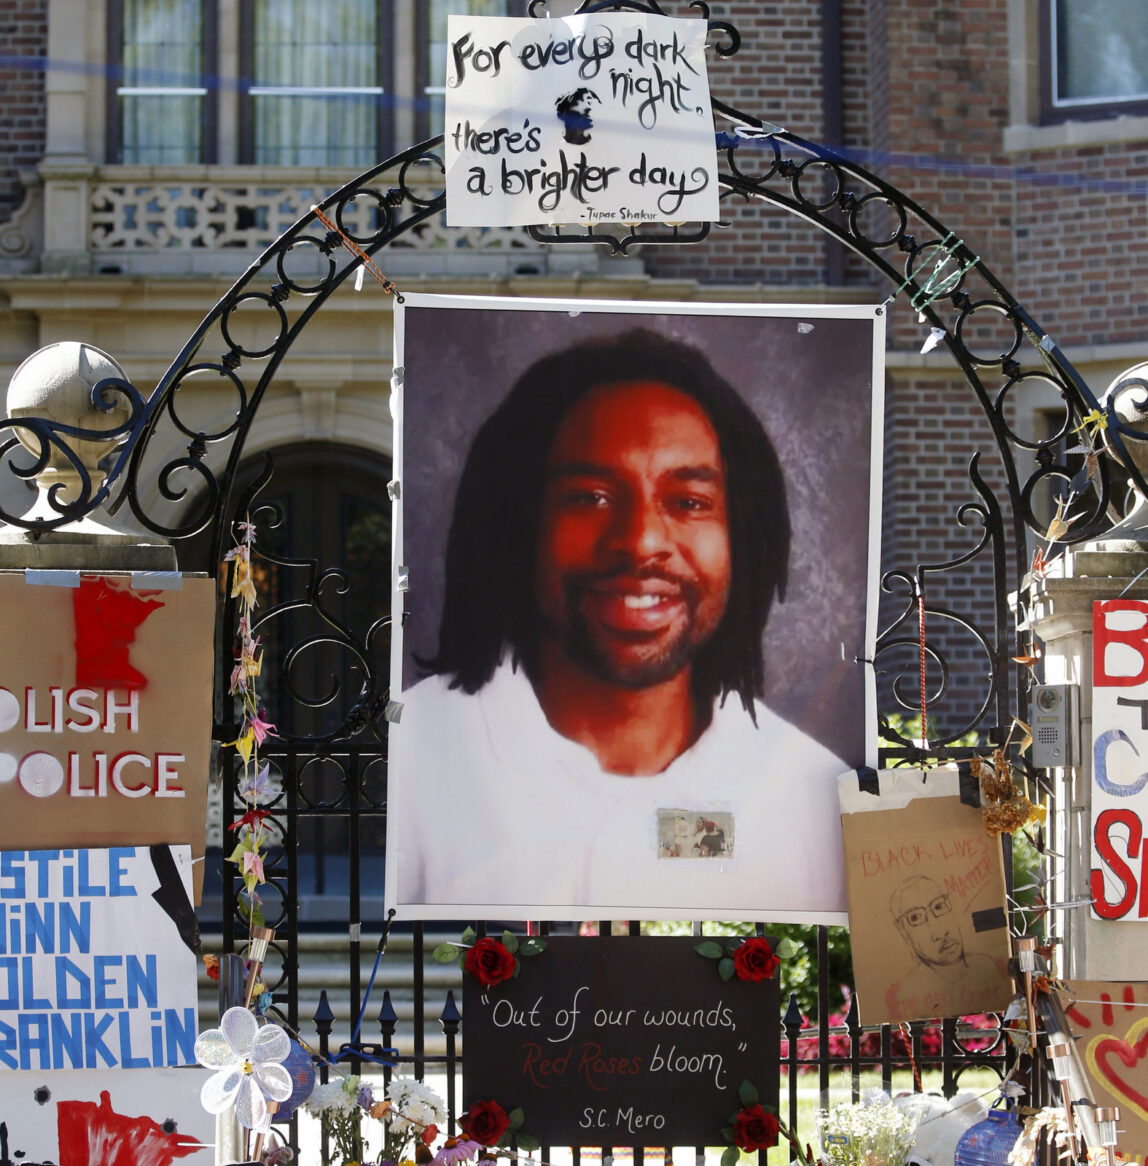 A memorial including a photo of Philando Castile adorns the gate to the governor's residence where protesters demonstrated in St. Paul, Minn., against the July 6 shooting death of Castile. (AP/Jim Mone)